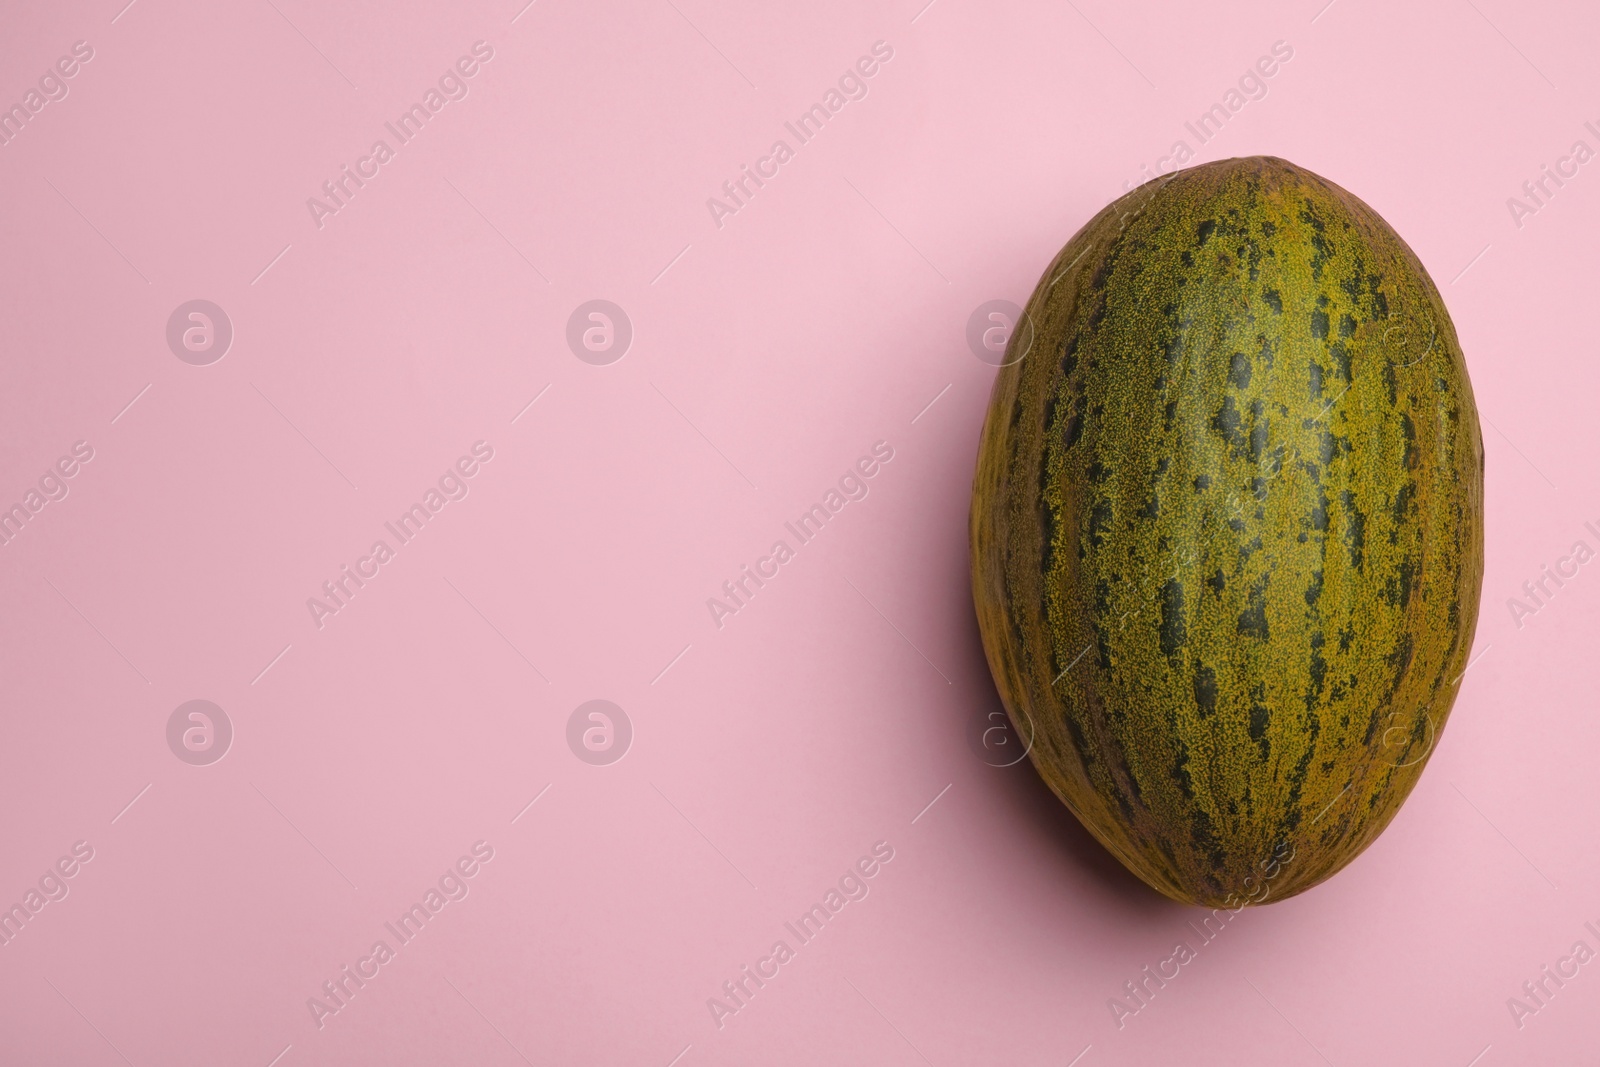 Photo of Whole ripe tasty melon on pink background, top view. Space for text